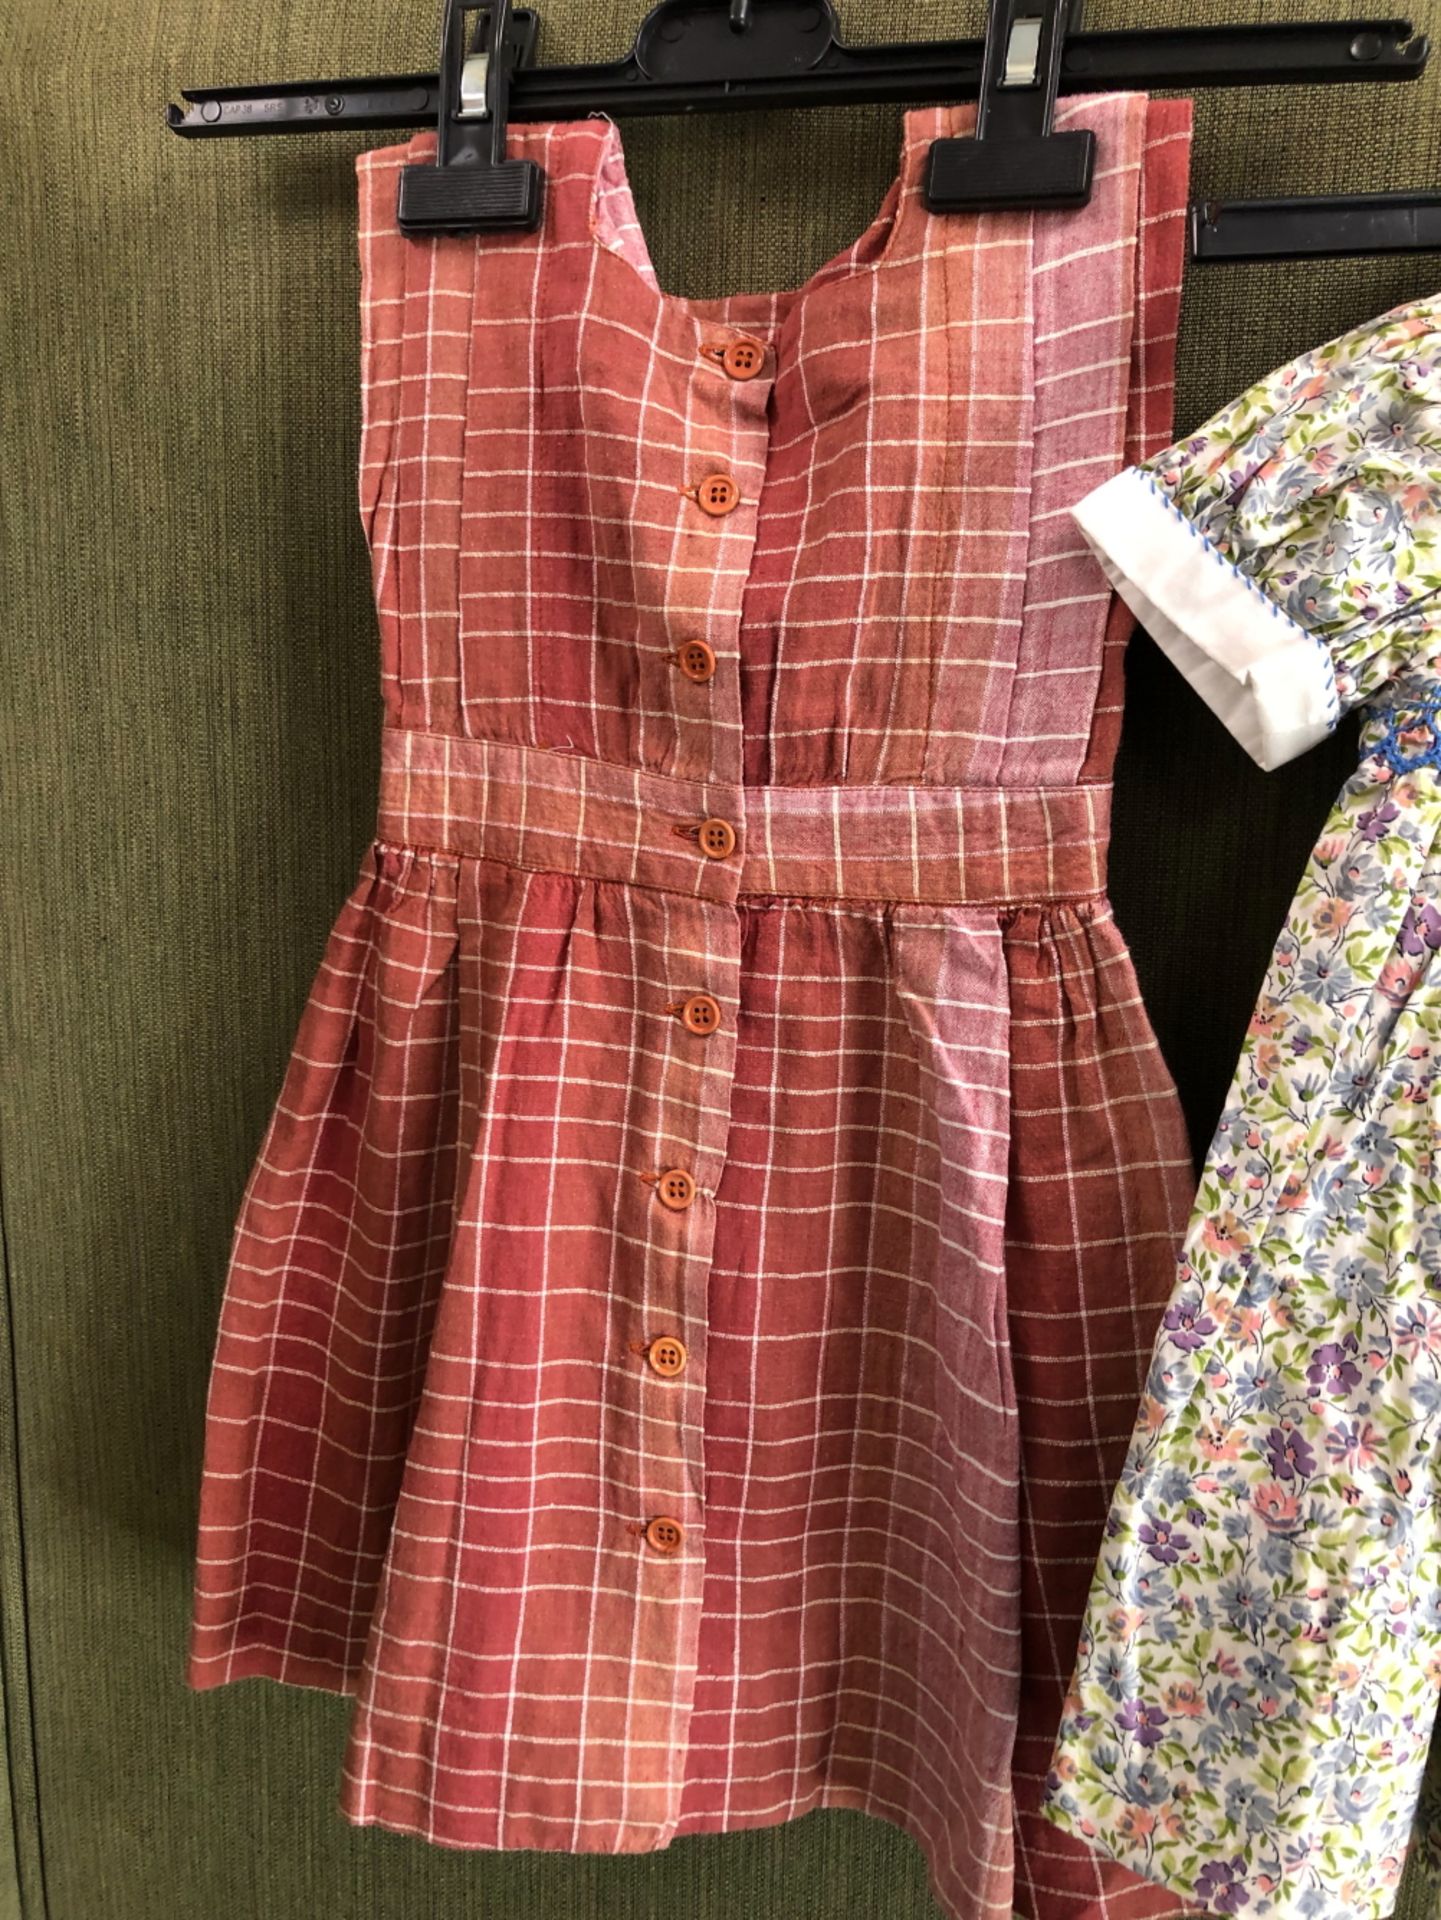 A LIBERTY OF LONDON SMOCKED CHILD'S DRESS, TOGETHER WITH TWO DANIEL HECHTER DRESSES (3) - Image 3 of 8